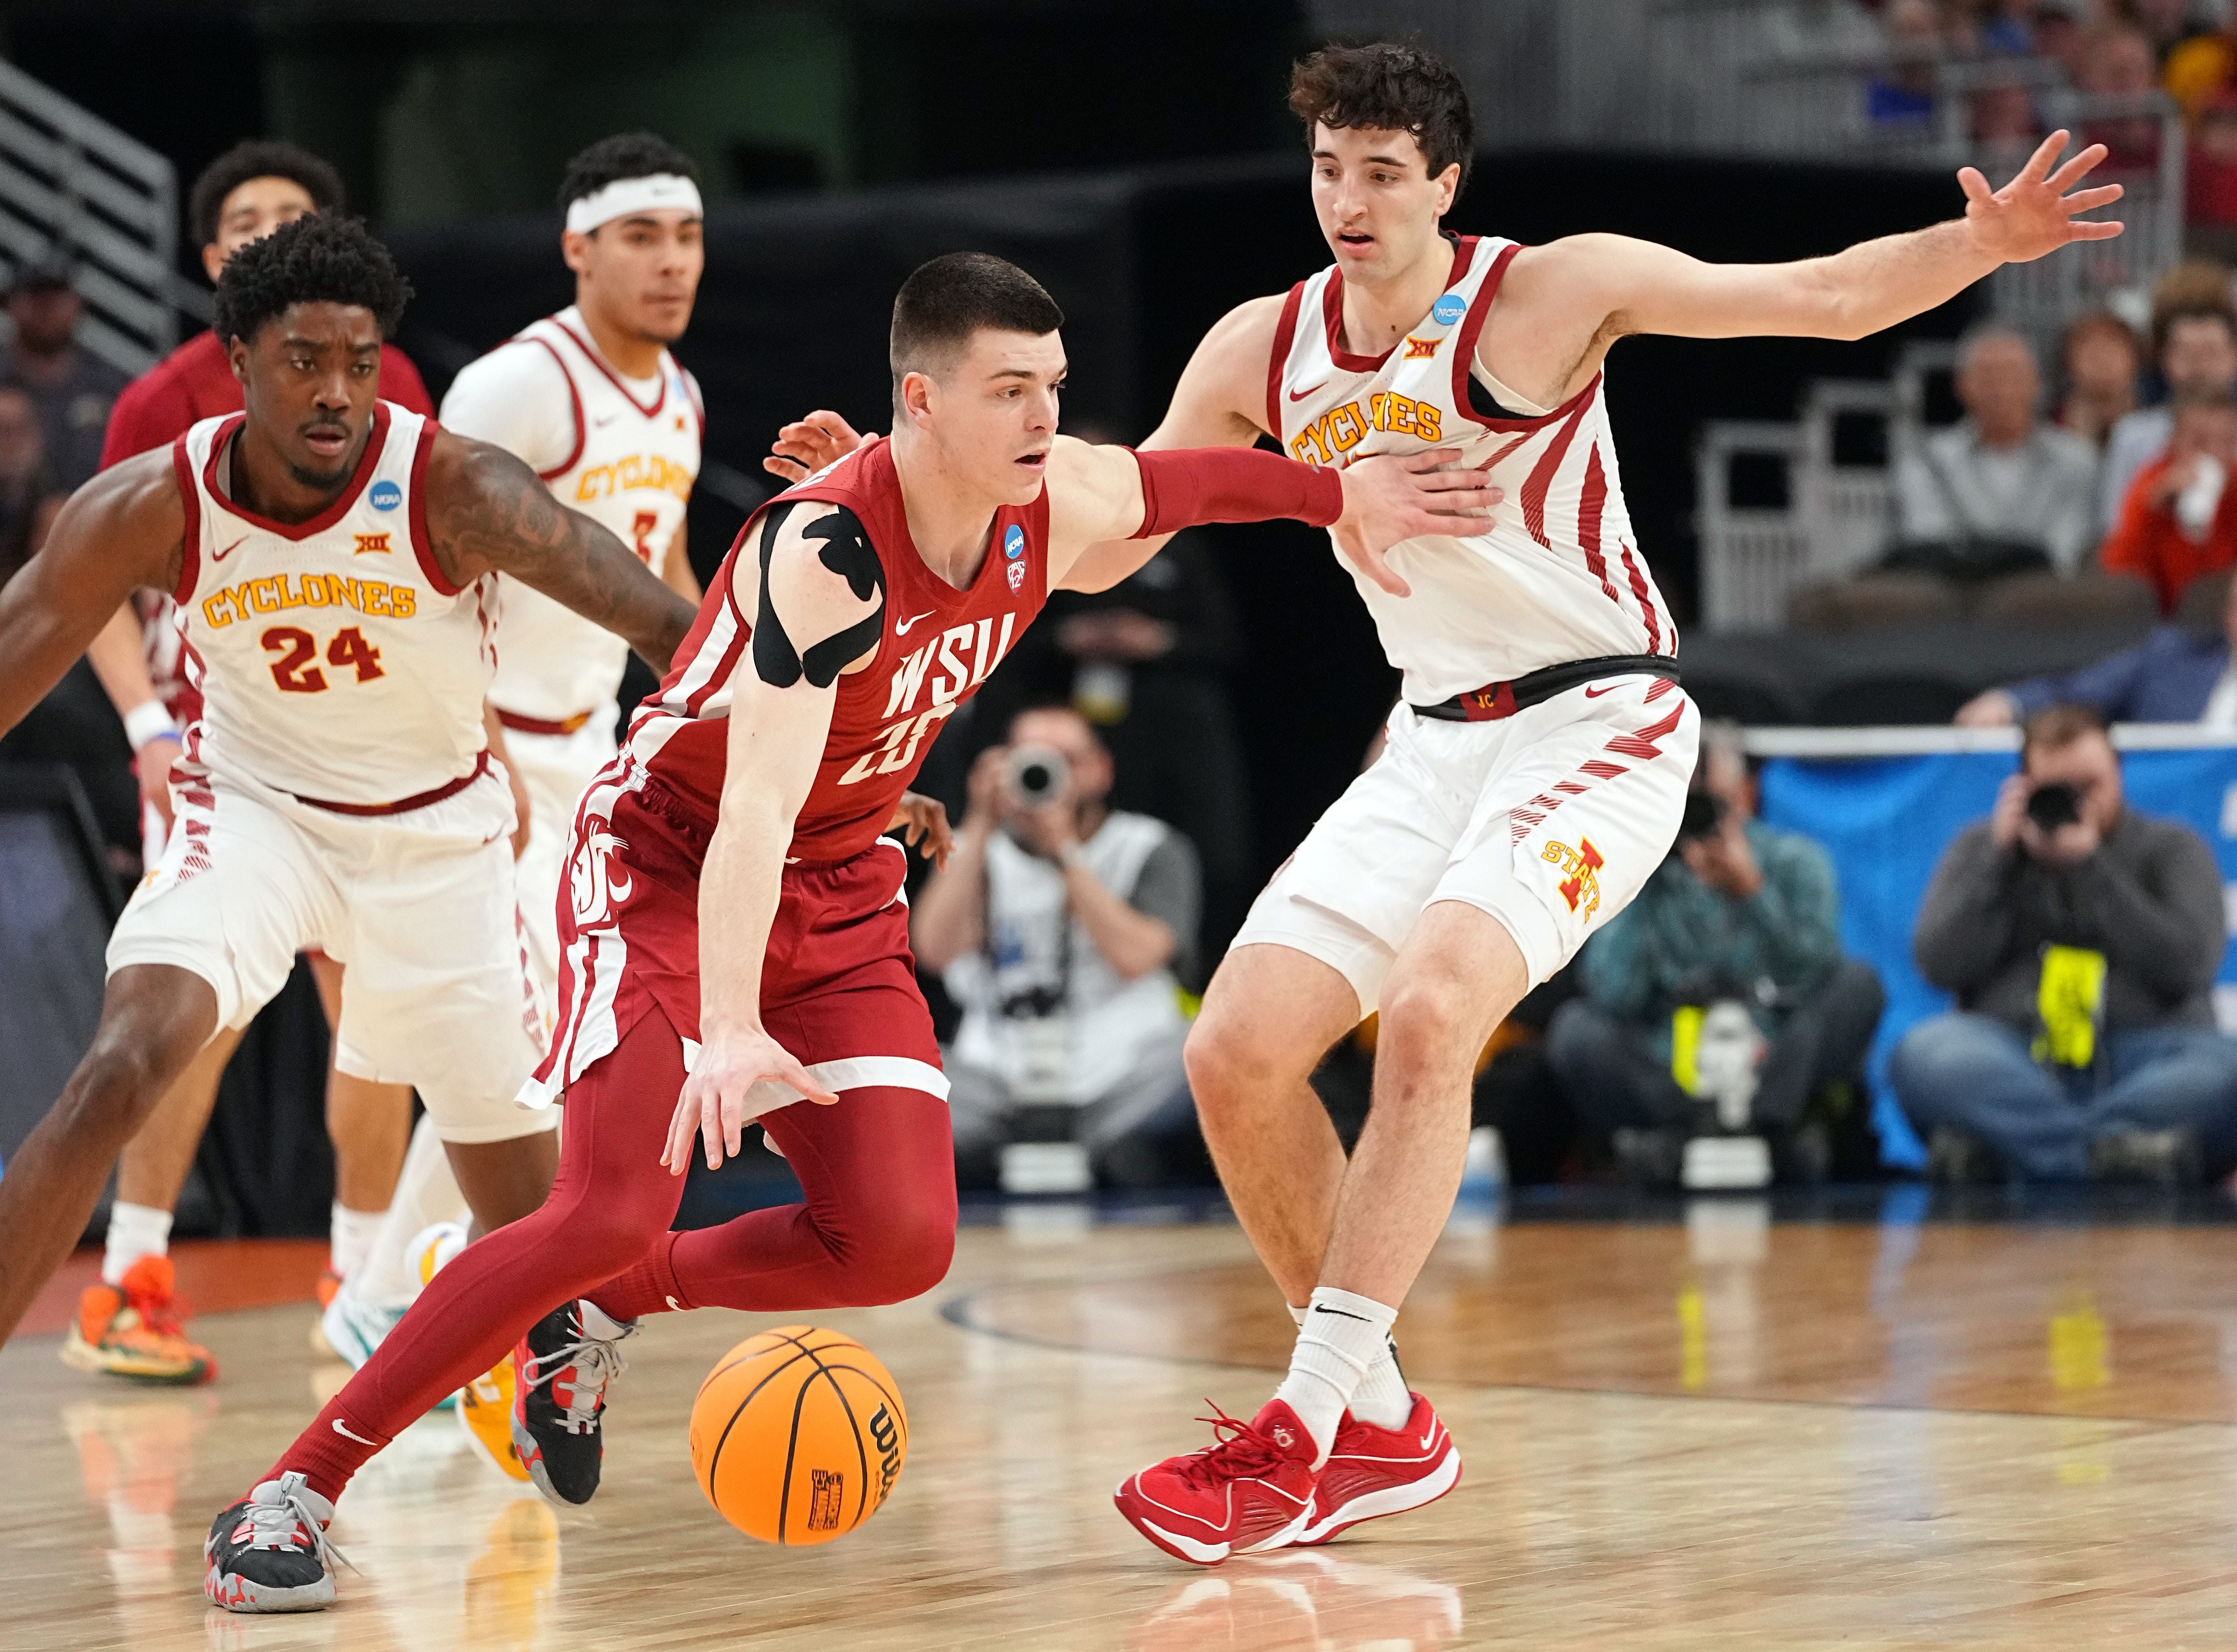 Milan Momcilovic averaged 10.9 ppg, 3.1 rpg and 1.2 apg this past season for Iowa State.